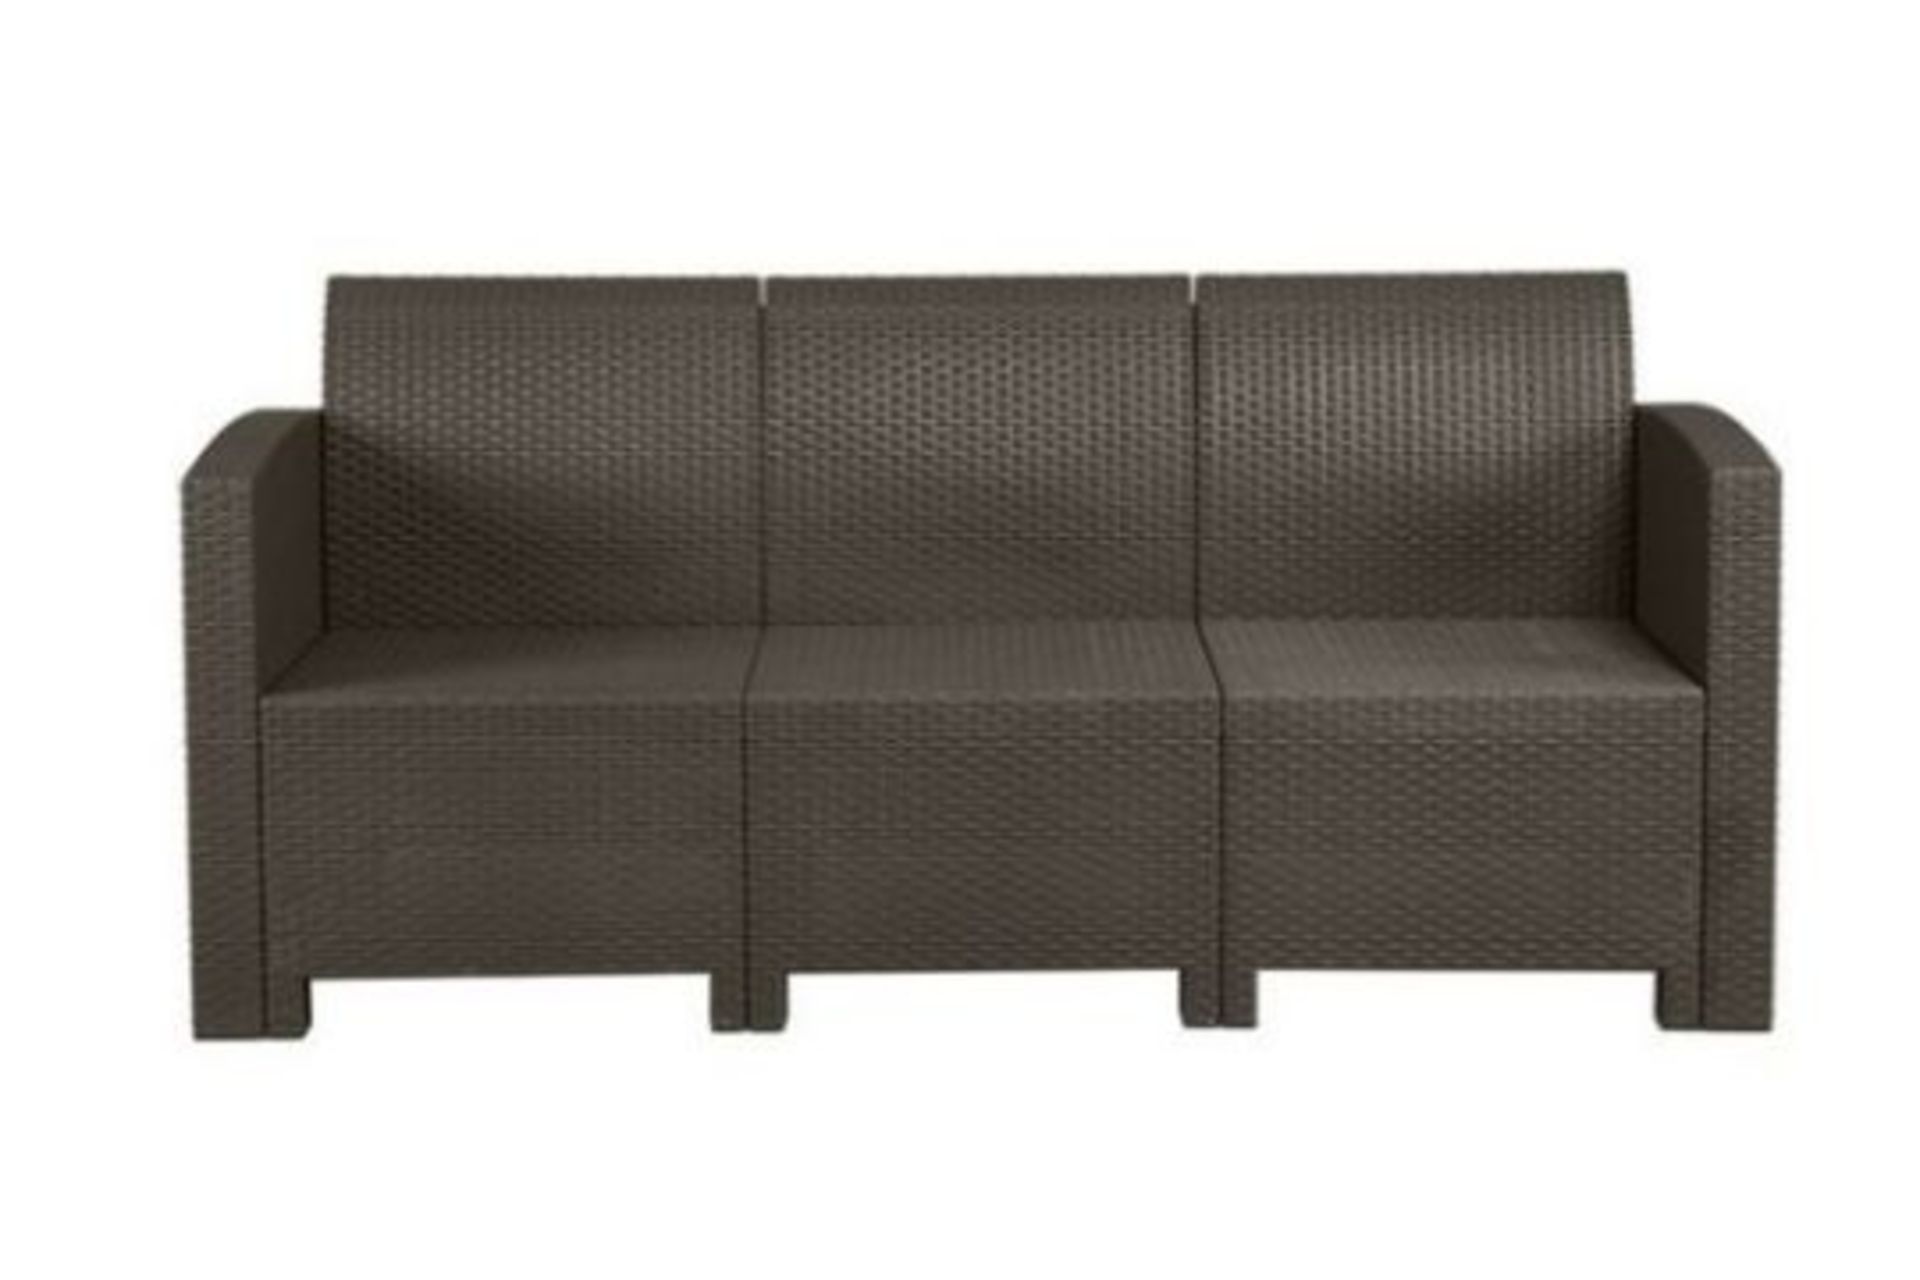 New Boxed Marbella 3-Seater Rattan-Effect Sofa in Brown. RRP £399.99. With a unique modern finish, - Image 3 of 4